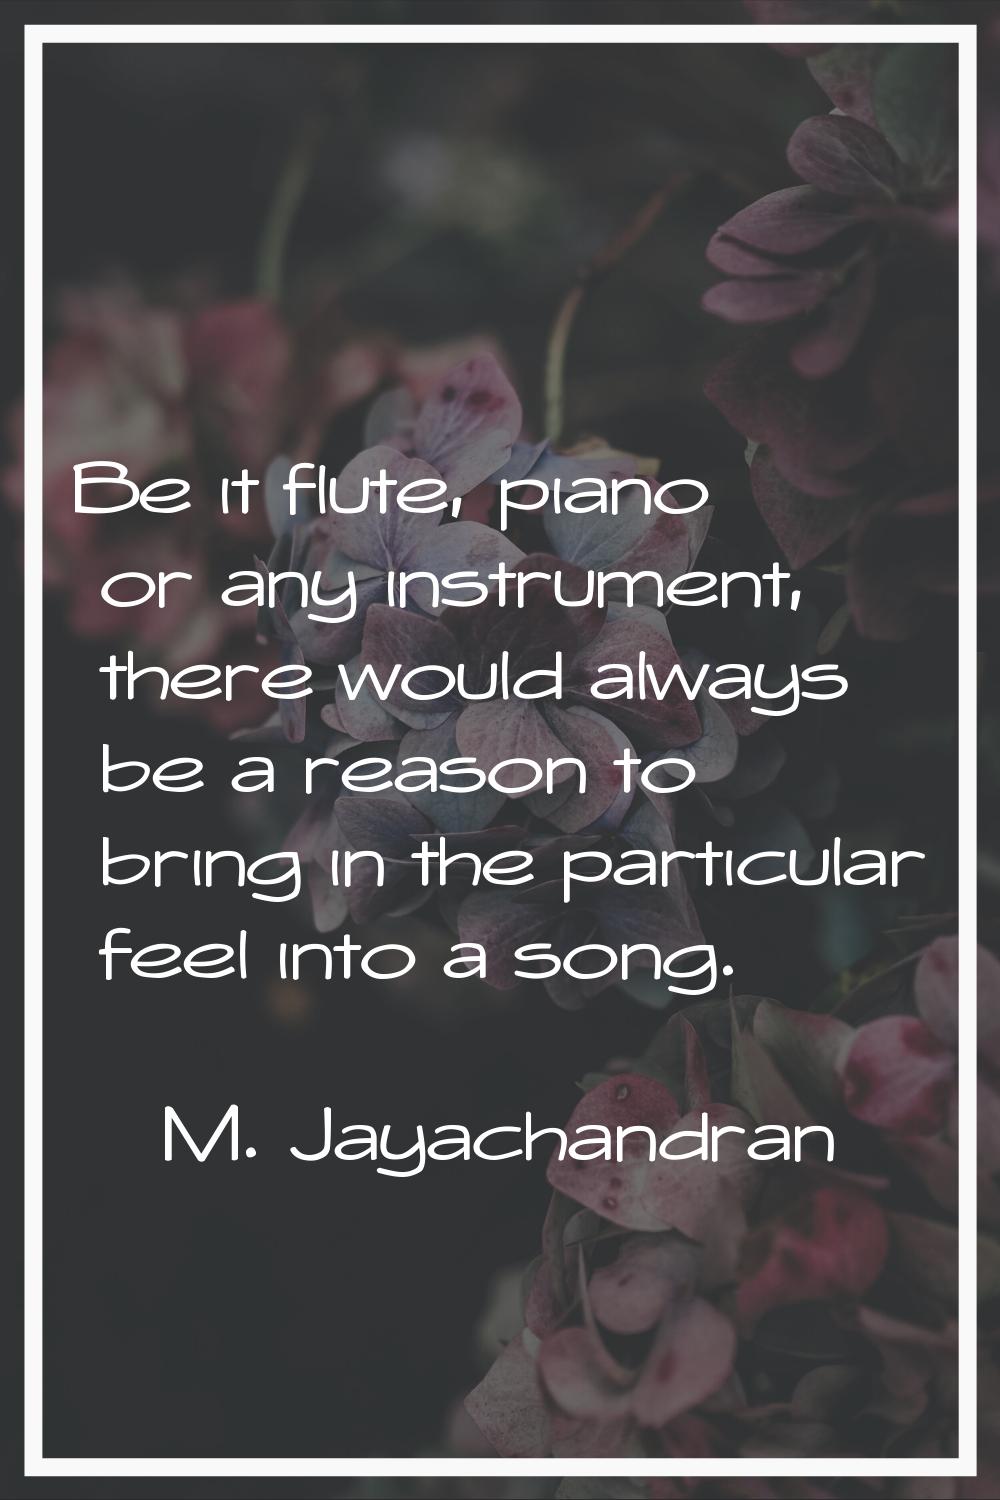 Be it flute, piano or any instrument, there would always be a reason to bring in the particular fee